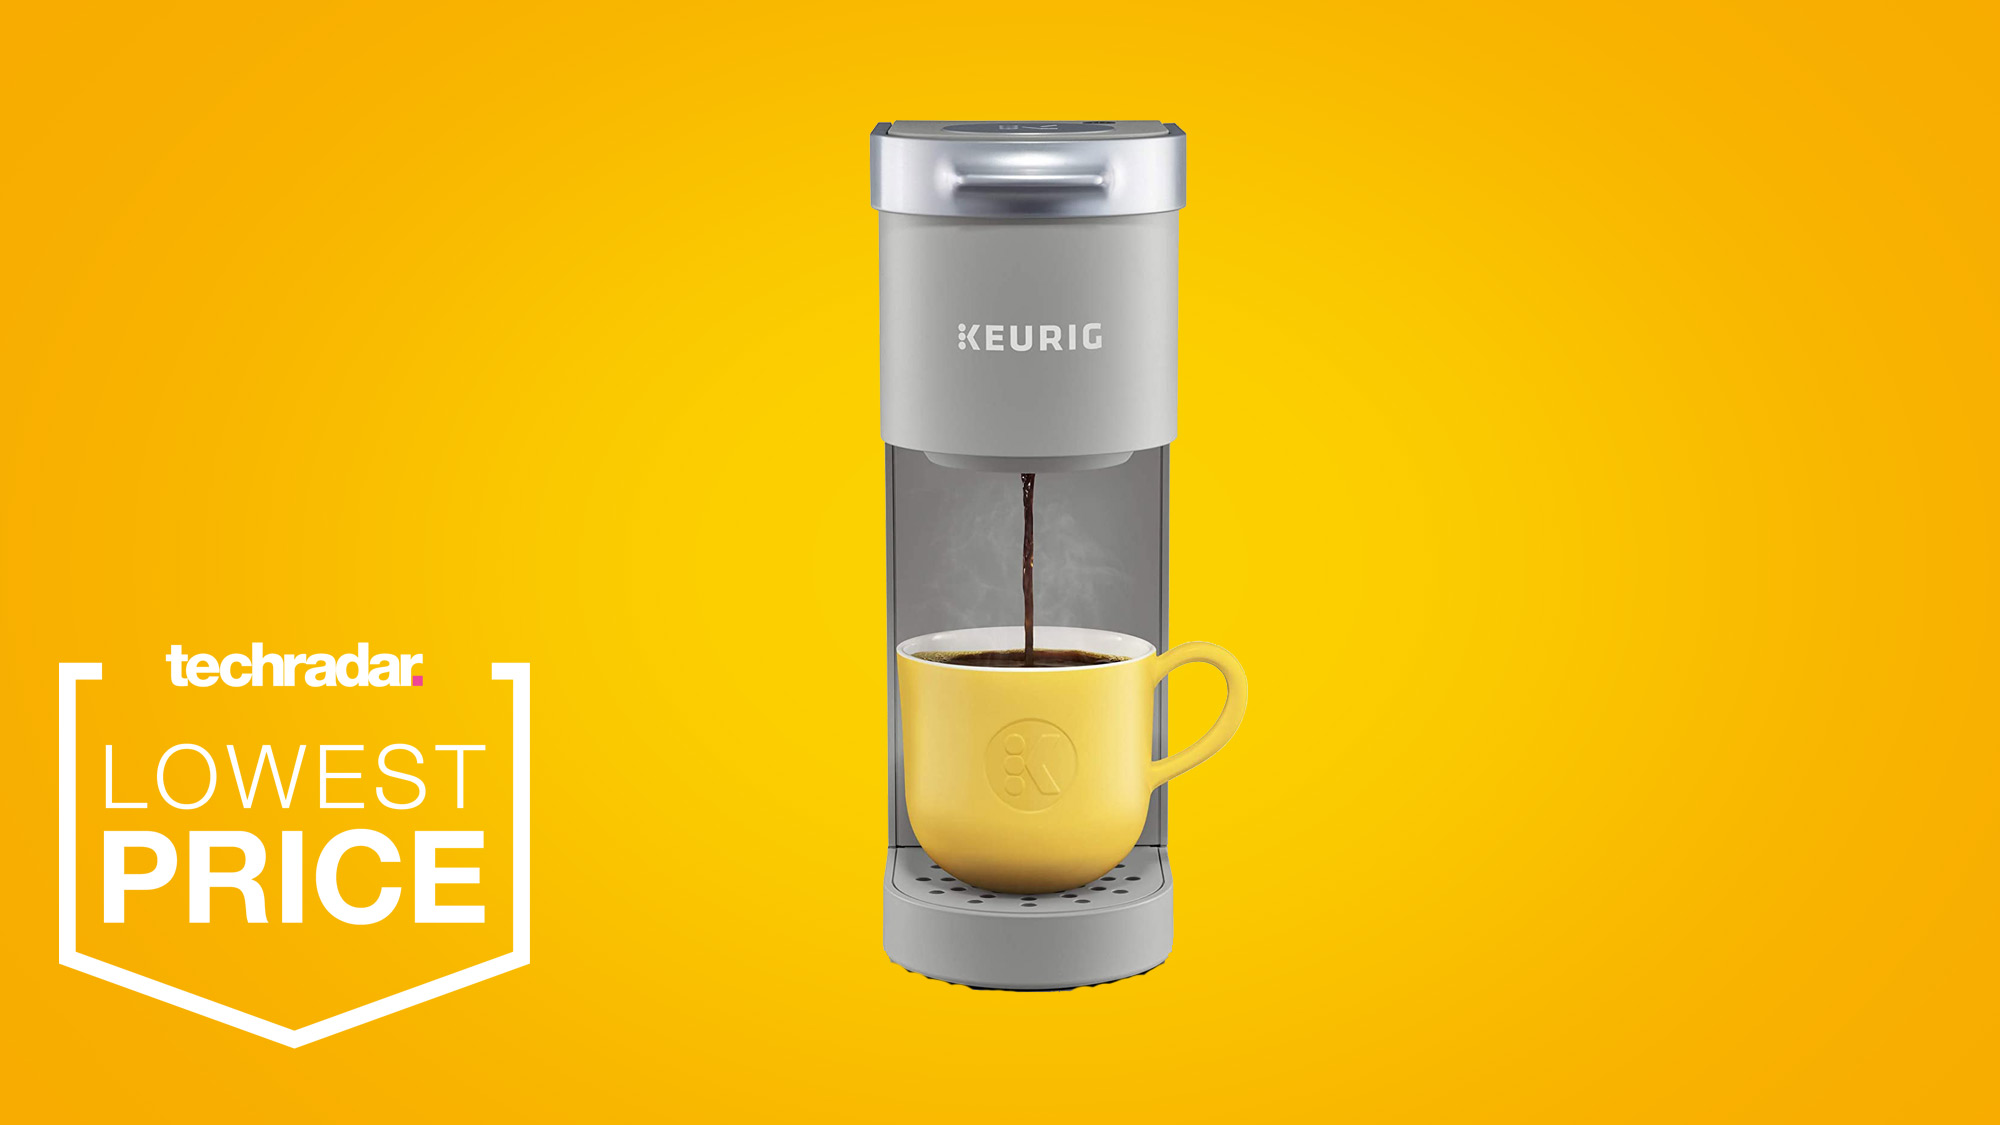 The Keurig K-Mini Coffee Maker in grey brewing coffee into a yellow mug on the cup stand on a yellow background